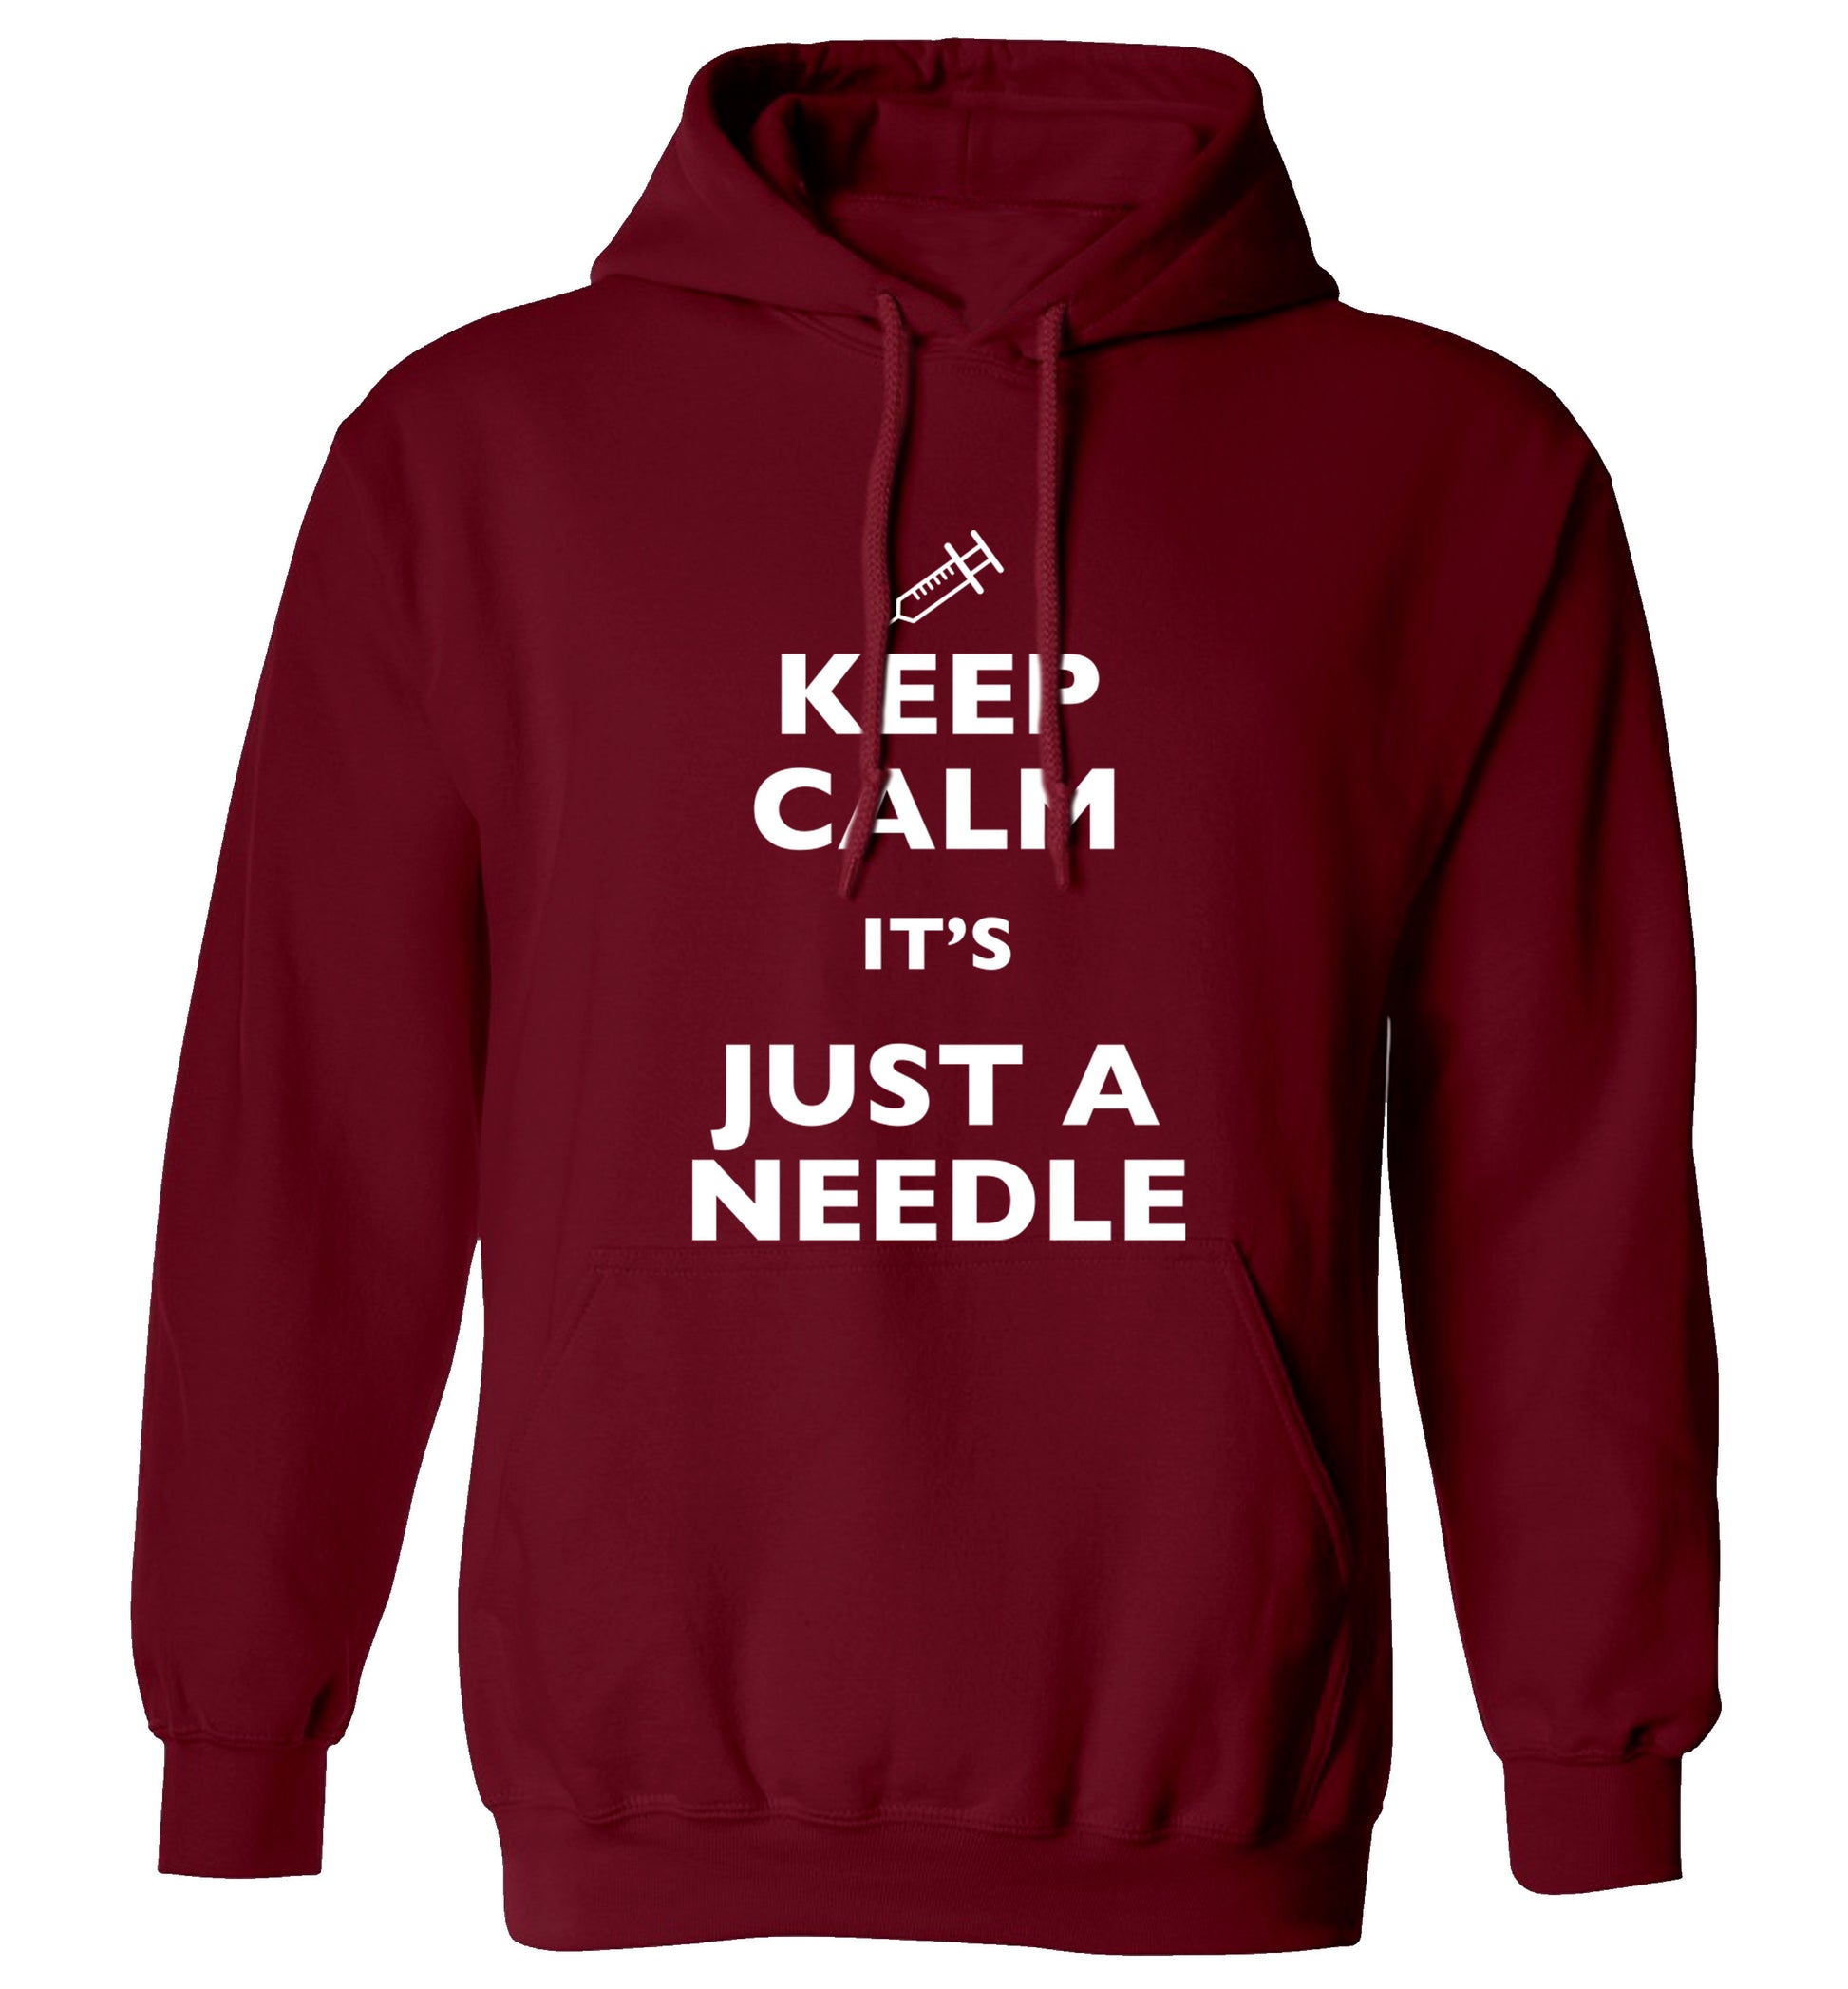 Keep calm it's only a needle adults unisex maroon hoodie 2XL